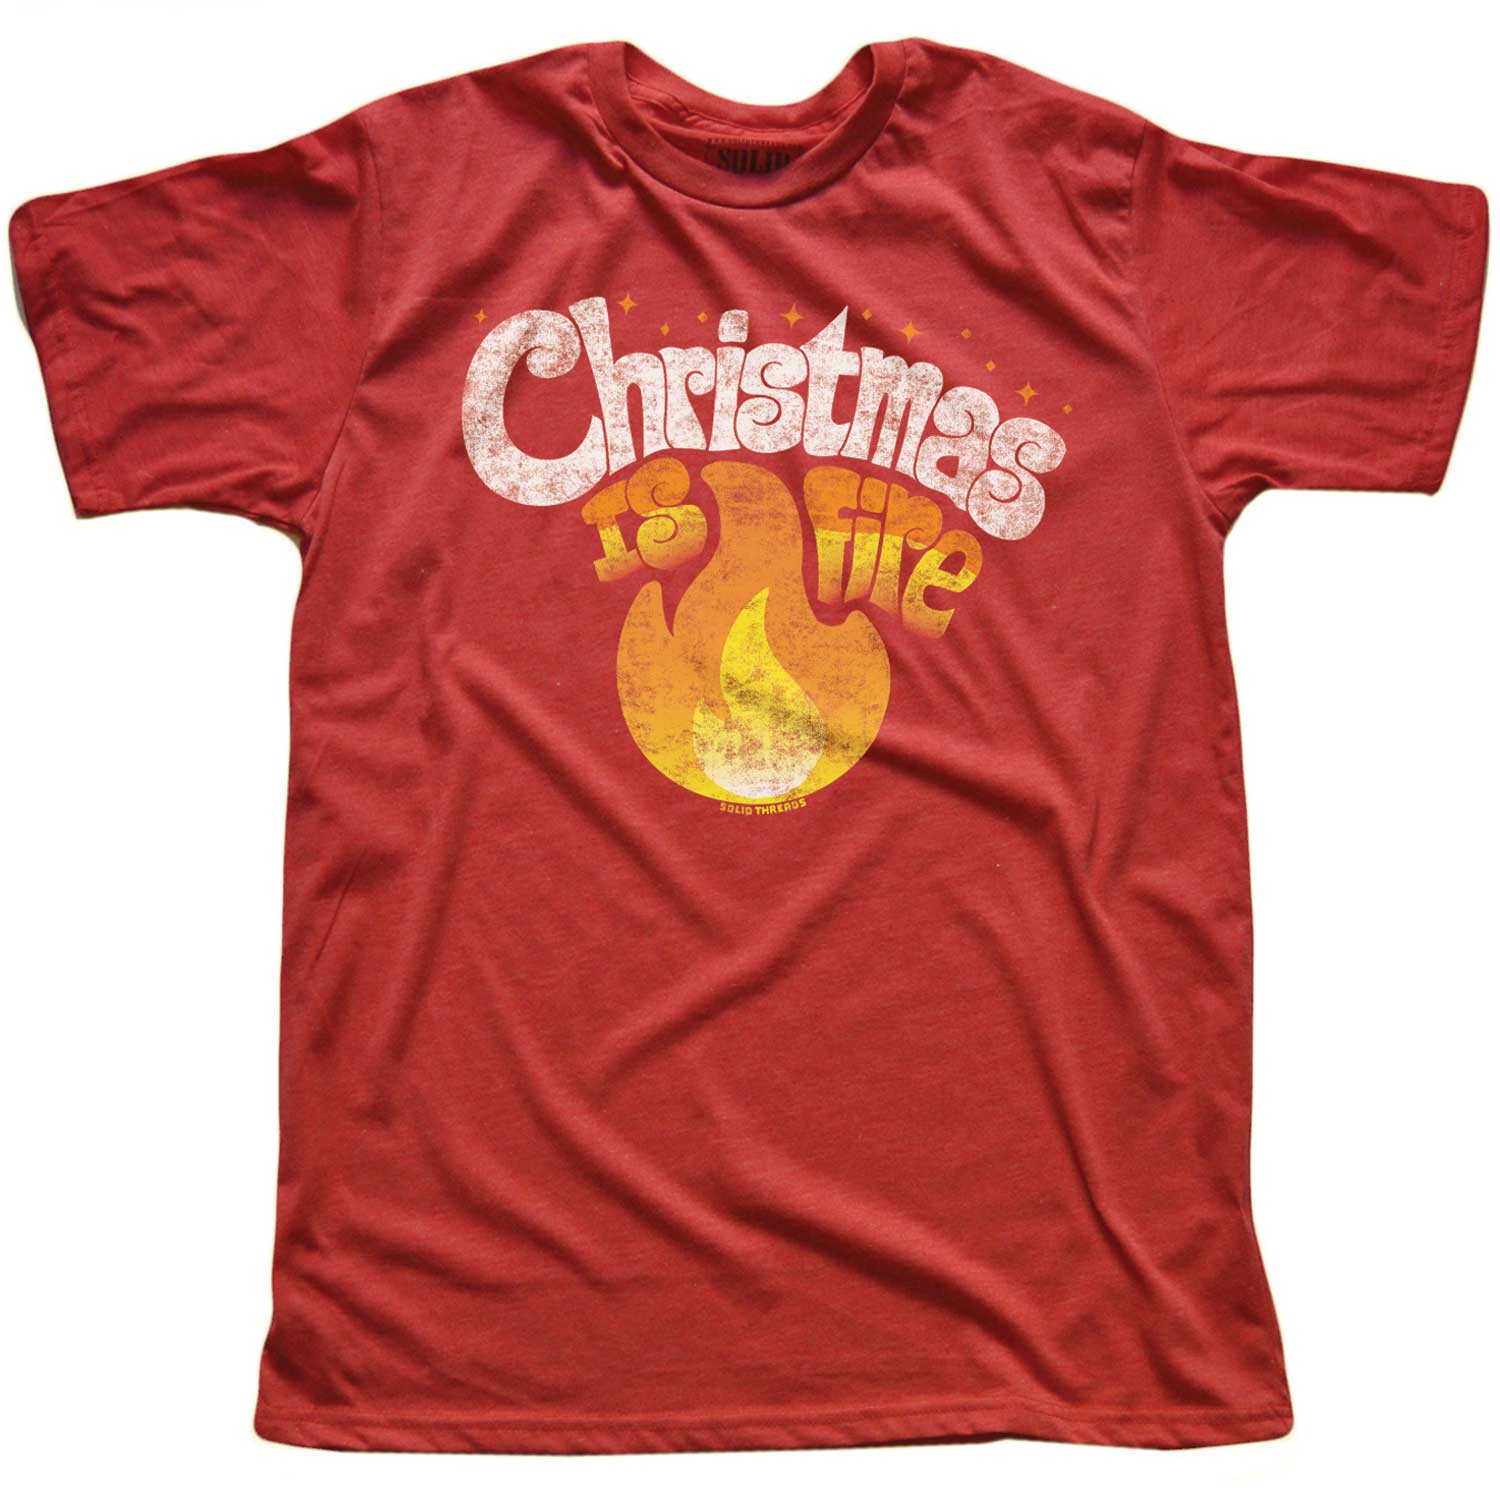 Men's Christmas Is Fire Vintage Graphic T-Shirt | Funny Holiday Party Tee | Solid Threads